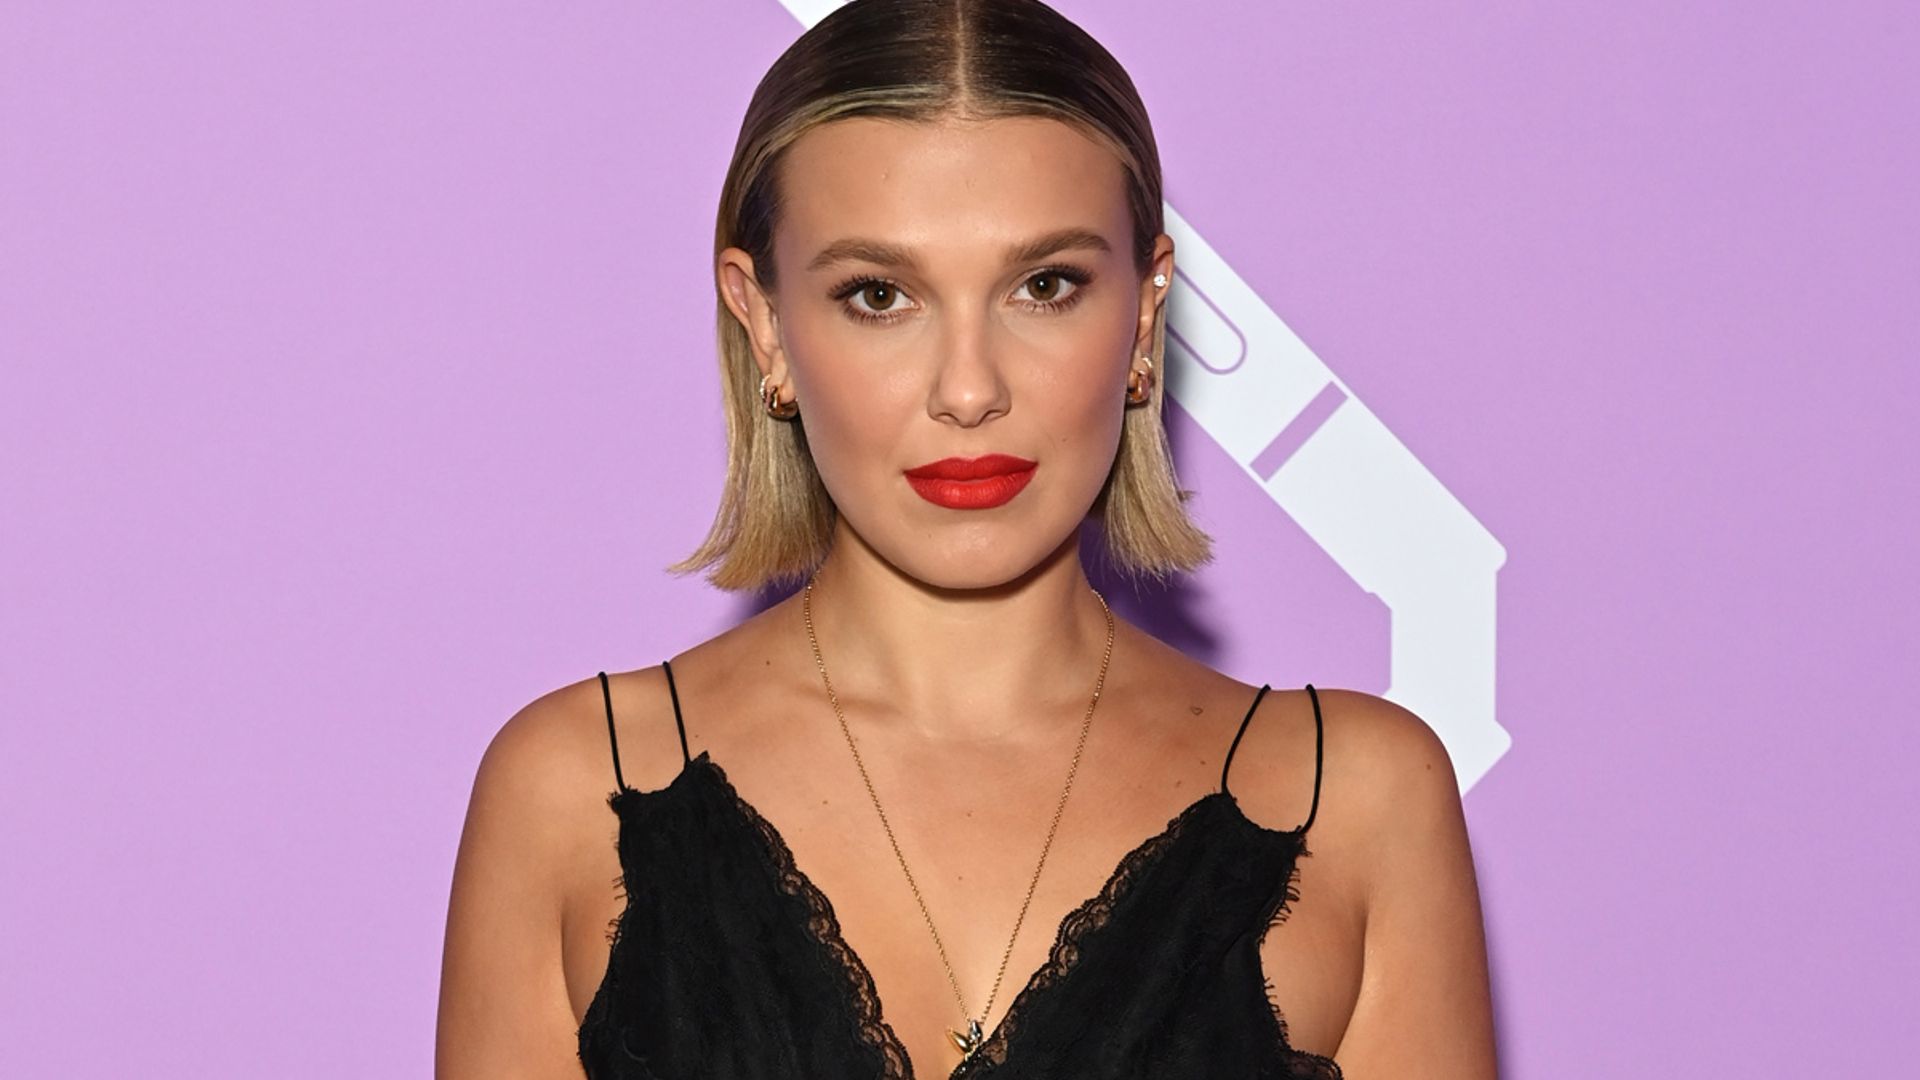 Millie Bobby Brown Is Extending the Bride-to-Be Vibes to Her Summer Bikinis